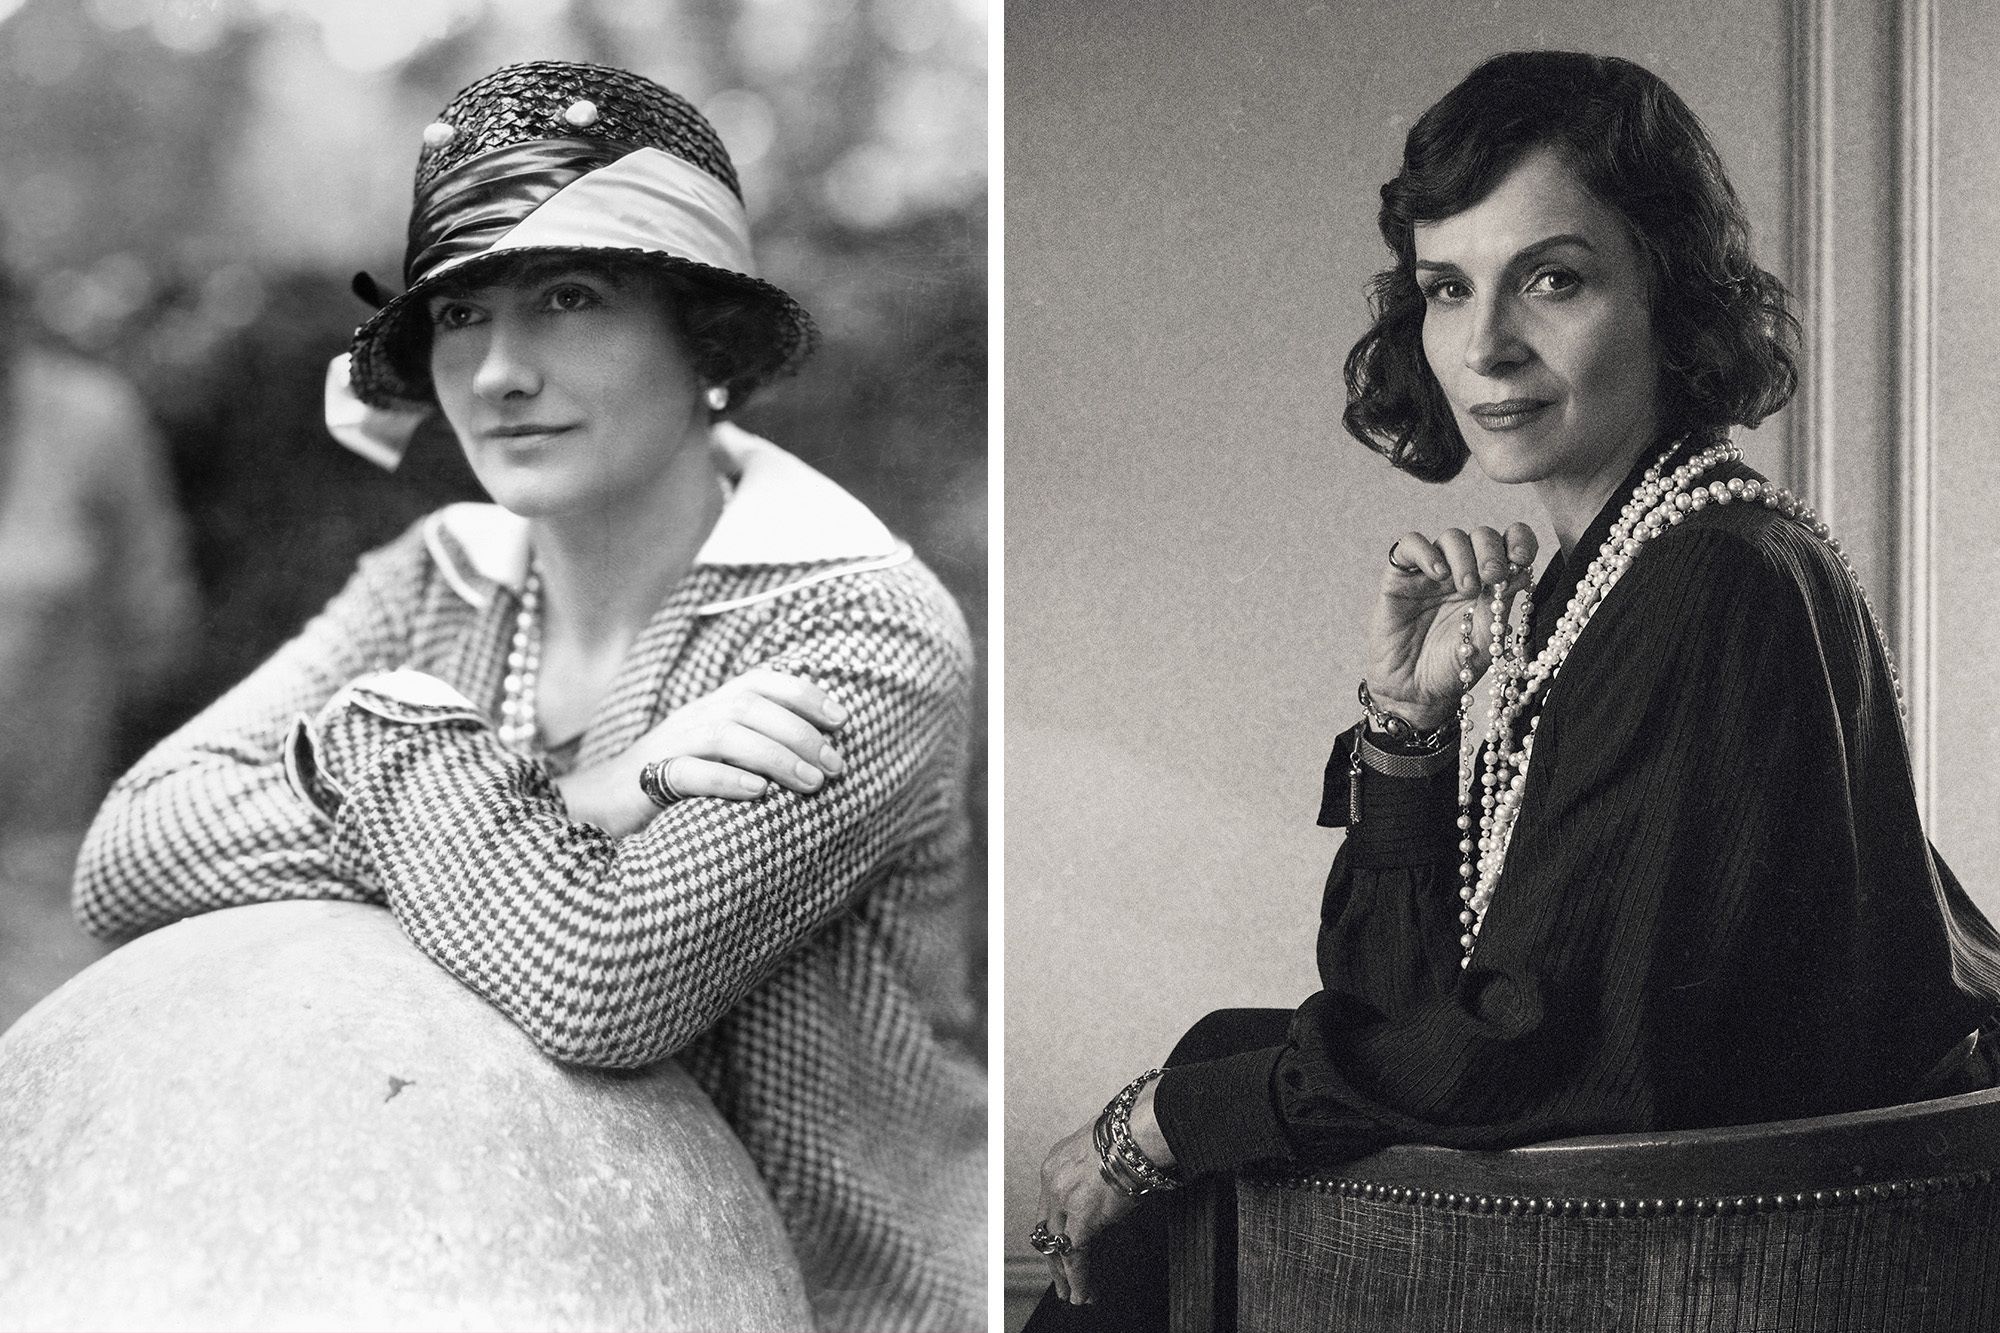 Coco Chanel Unbuttoned review – extraordinary woman, shame about the Nazis, Documentary